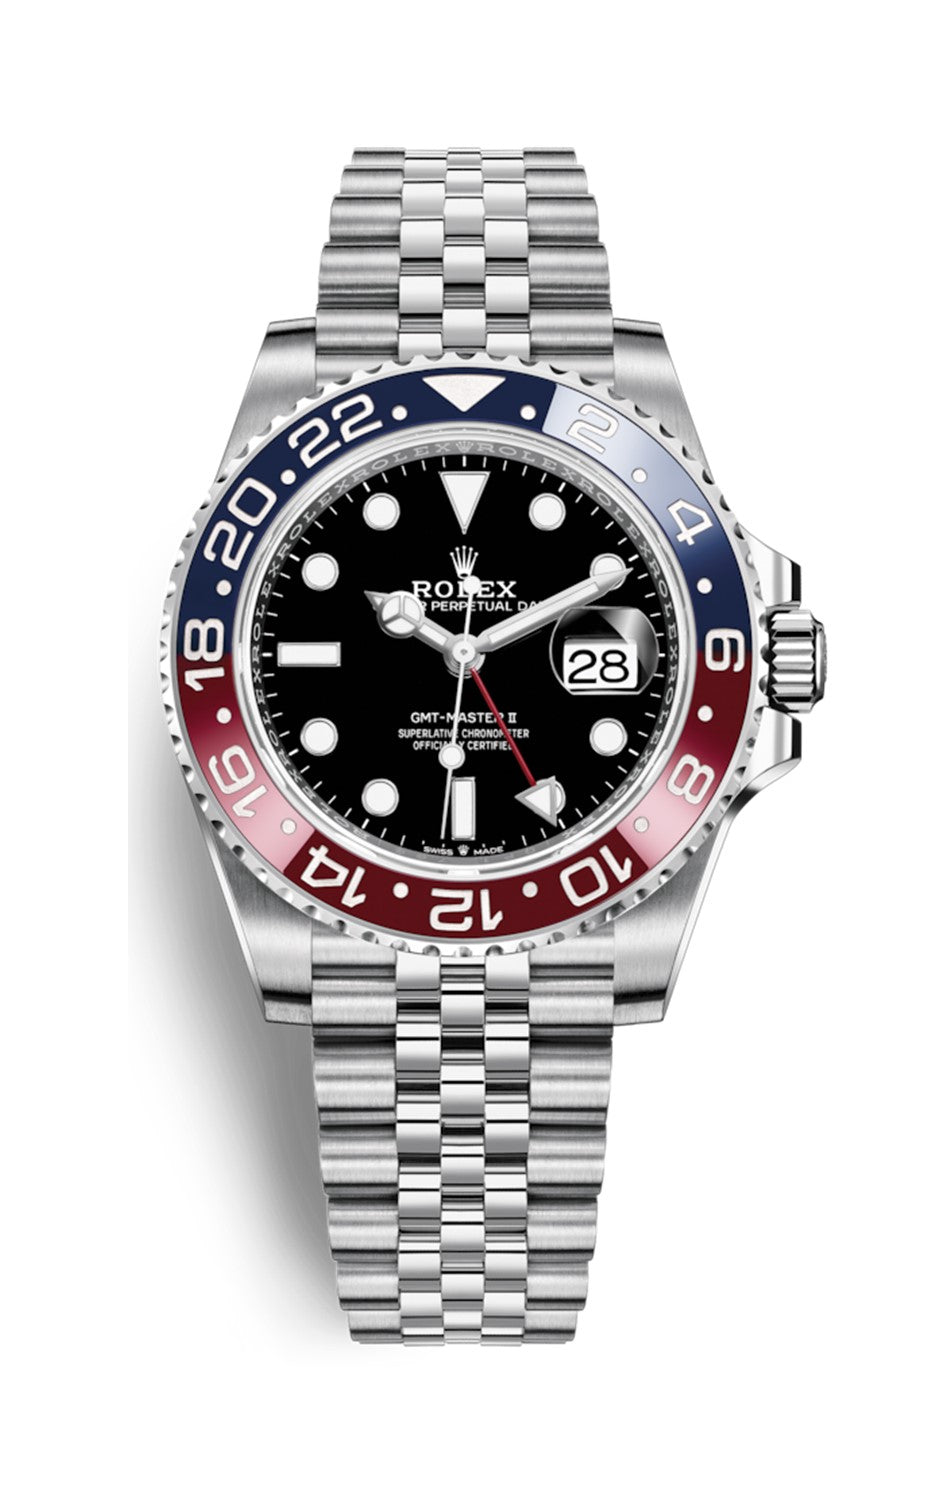 Is the Rolex GMT Master II 126710BLNR 